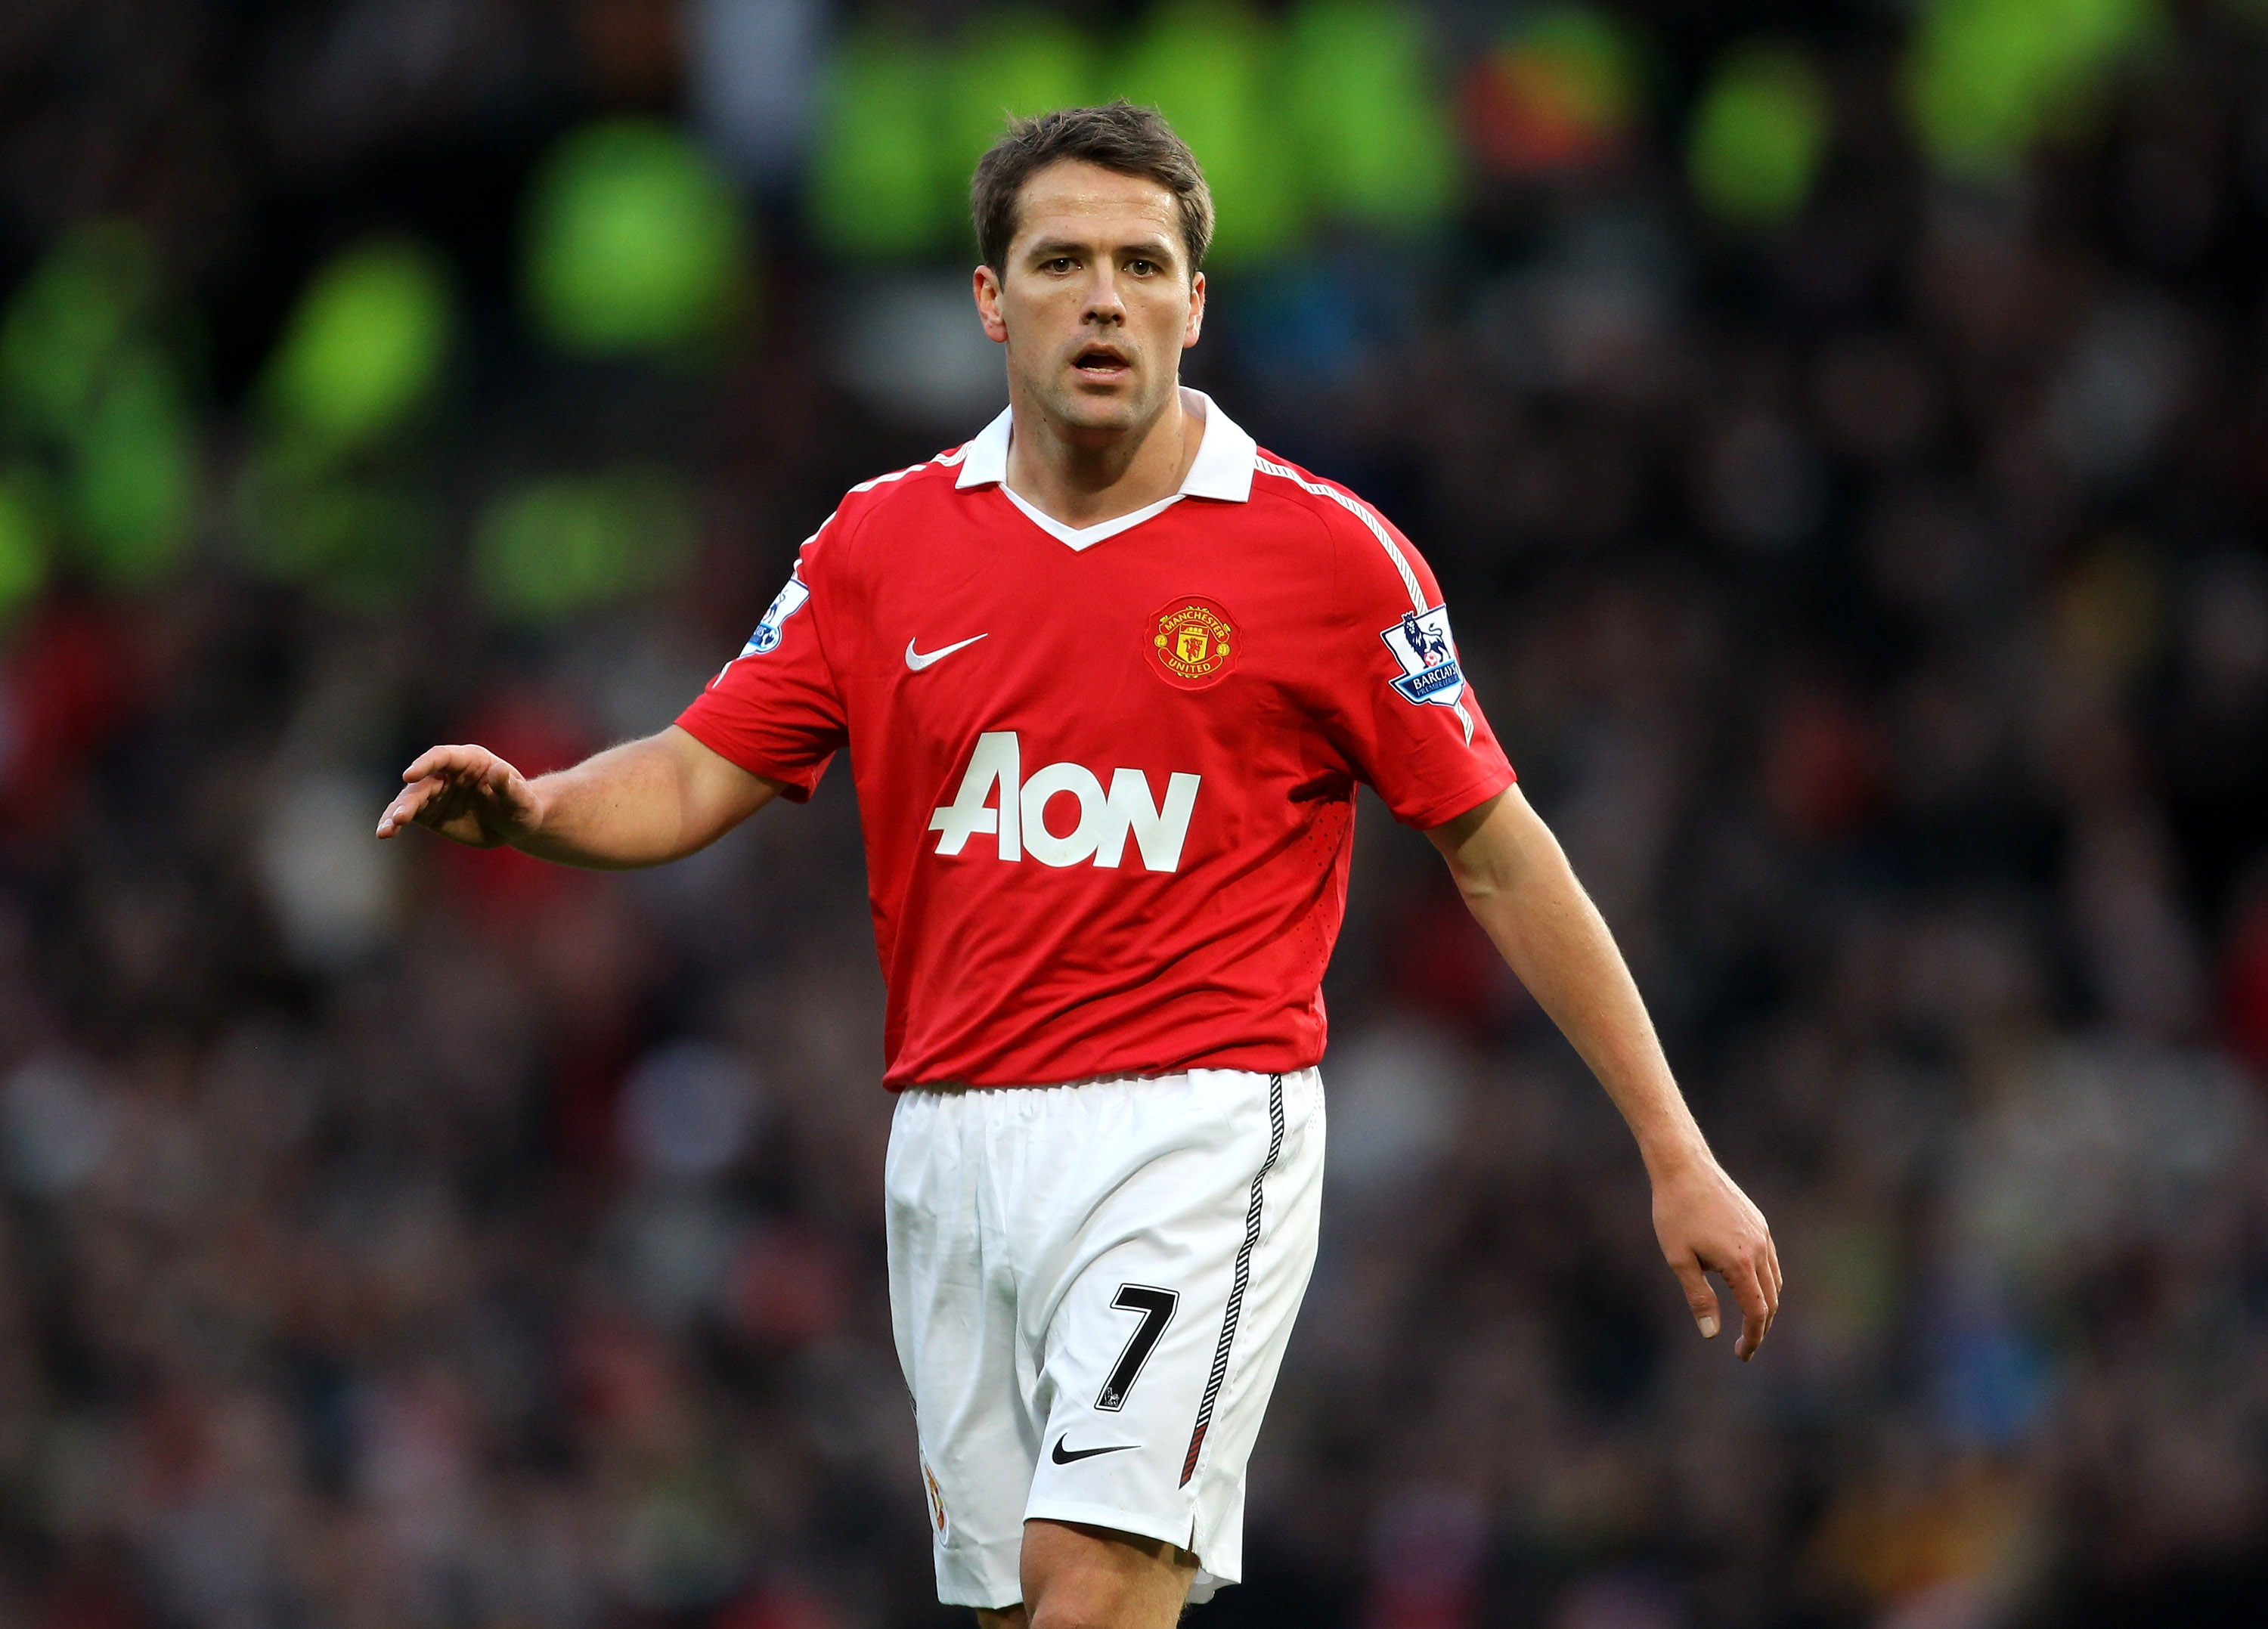 MANCHESTER, ENGLAND - JANUARY 09:  Michael Owen of Manchester United looks on during the FA Cup sponsored by E.ON 3rd round match between Manchester United and Liverpool at Old Trafford on January 9, 2011 in Manchester, England. (Photo by Alex Livesey/Get